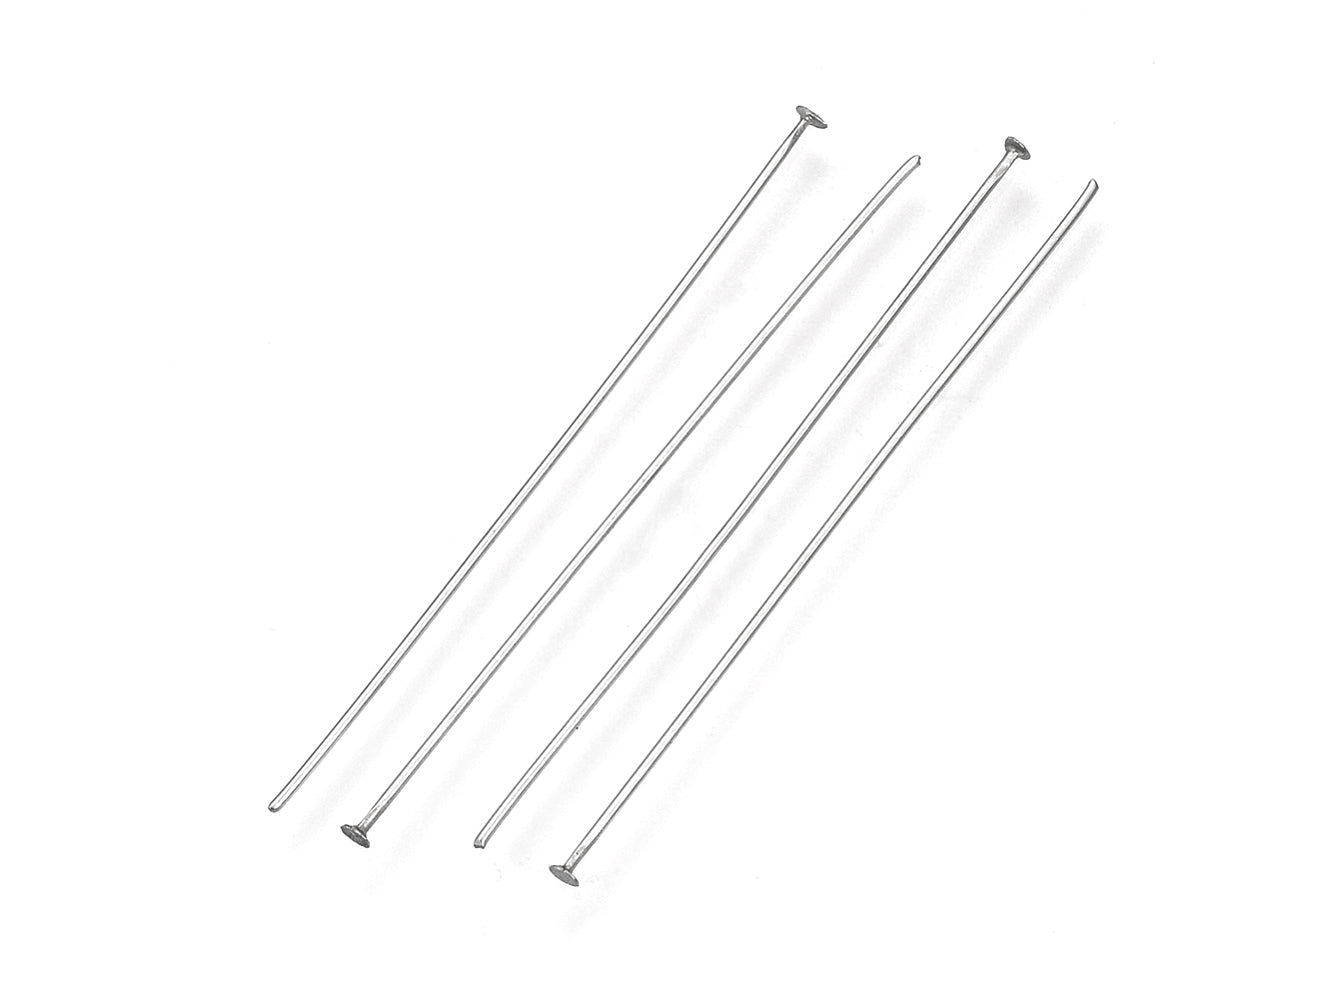 Stainless steel flat head pins - 30, 40 or 50mm - Hypoallergenic jewelry findings